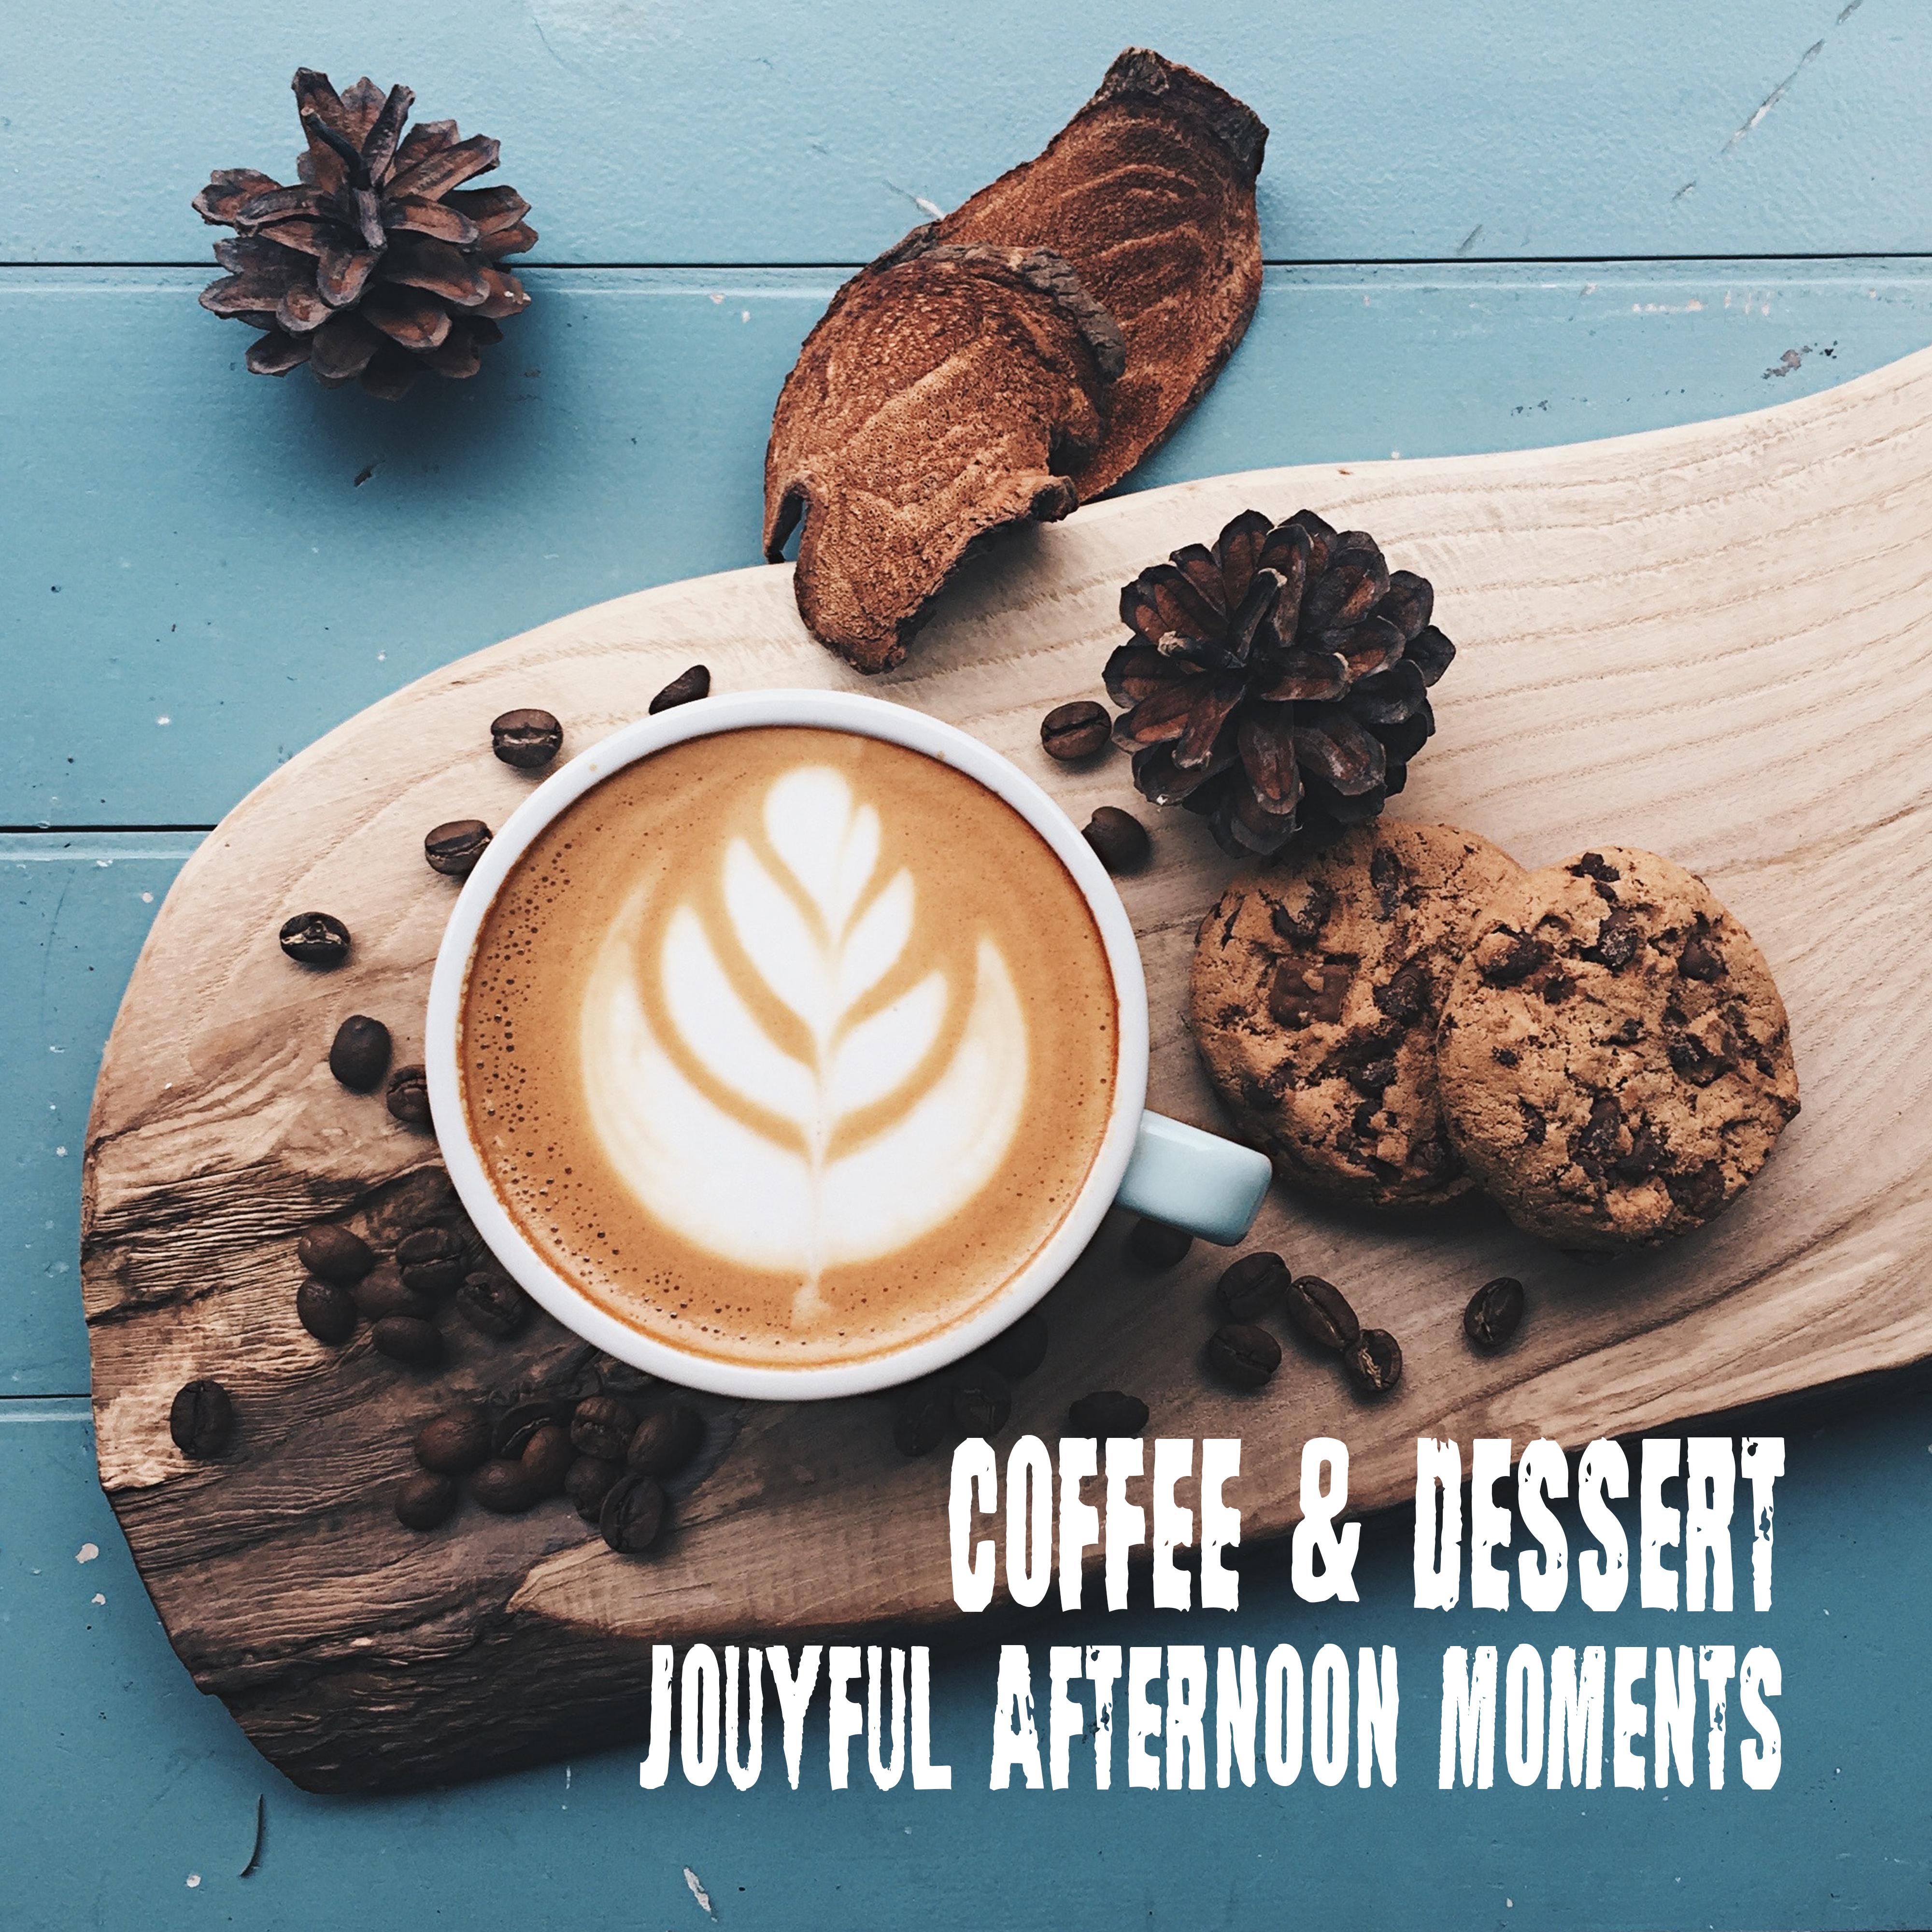 Coffee & Dessert Jouyful Afternoon Moments: 2019 Smooth Jazz with Beautiful Sounds of Wind Instruments Like Trumpet, Saxophone & Others, Perfect Background Music for Friends Meeting in a Cafe